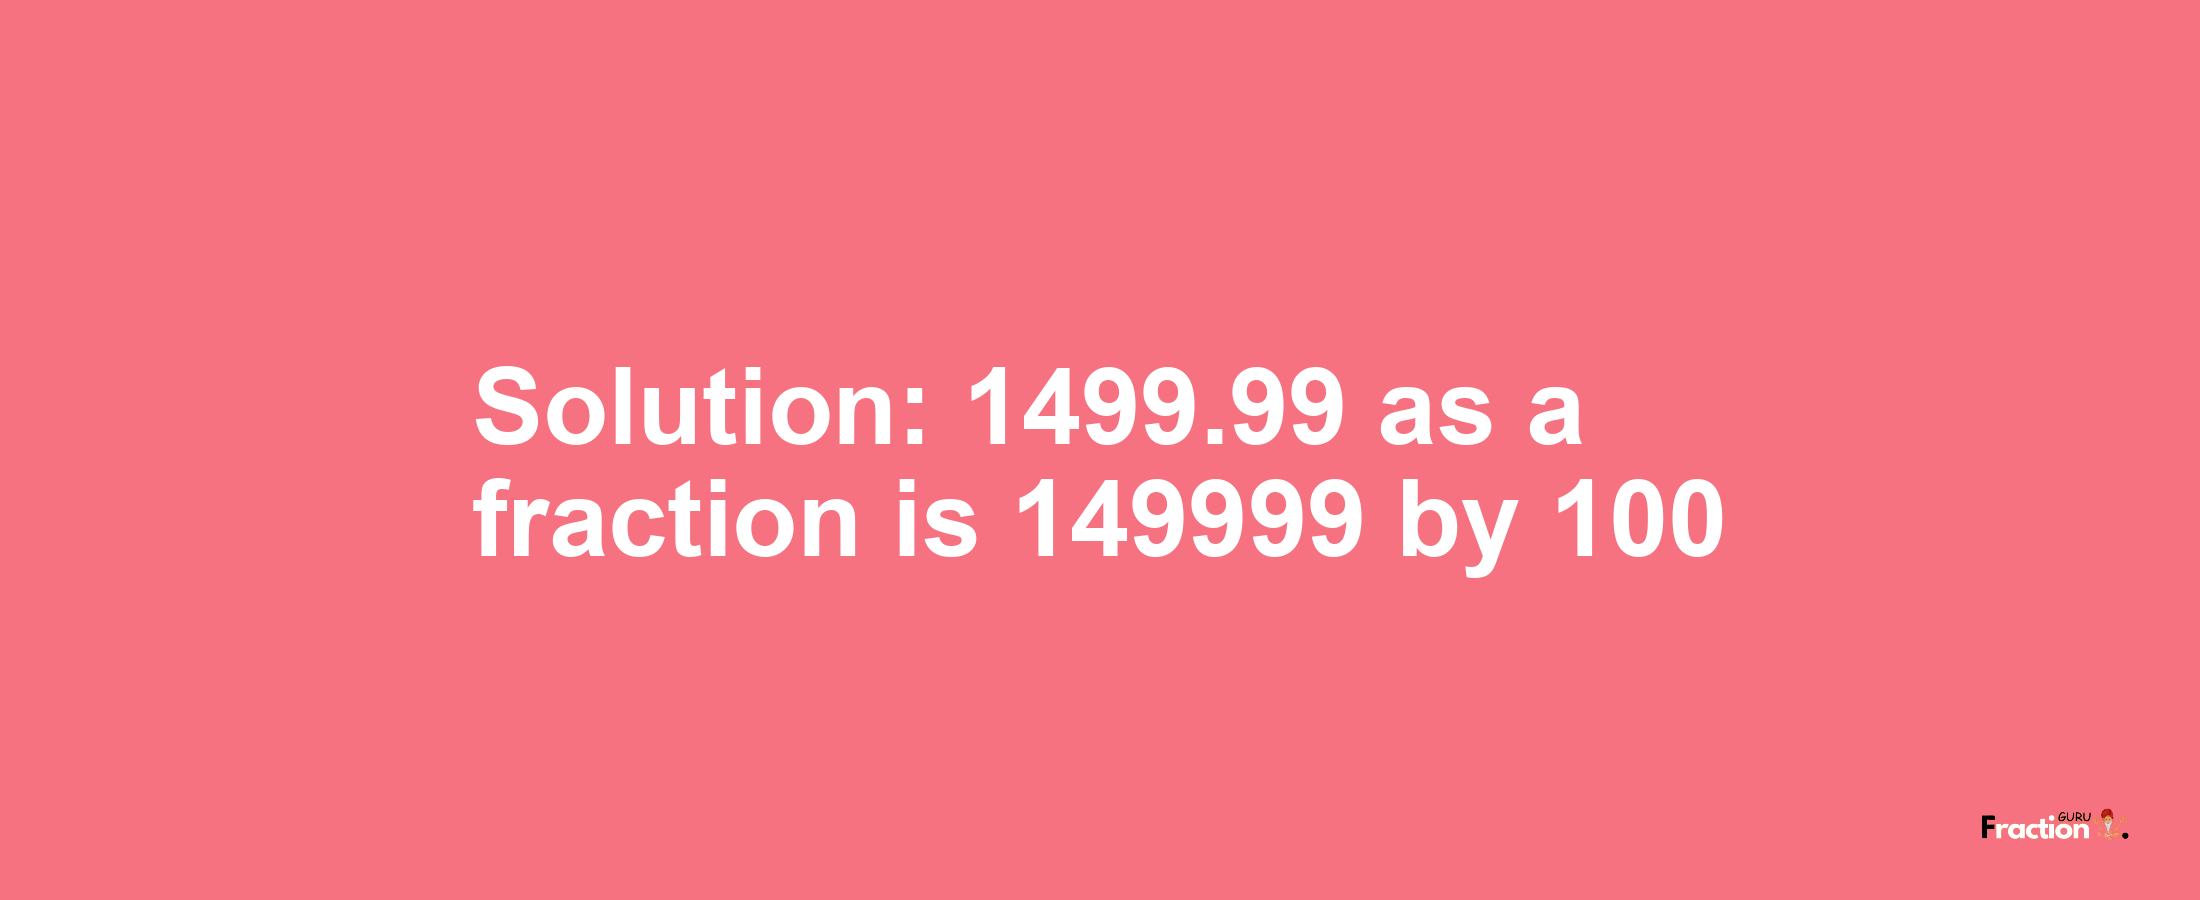 Solution:1499.99 as a fraction is 149999/100